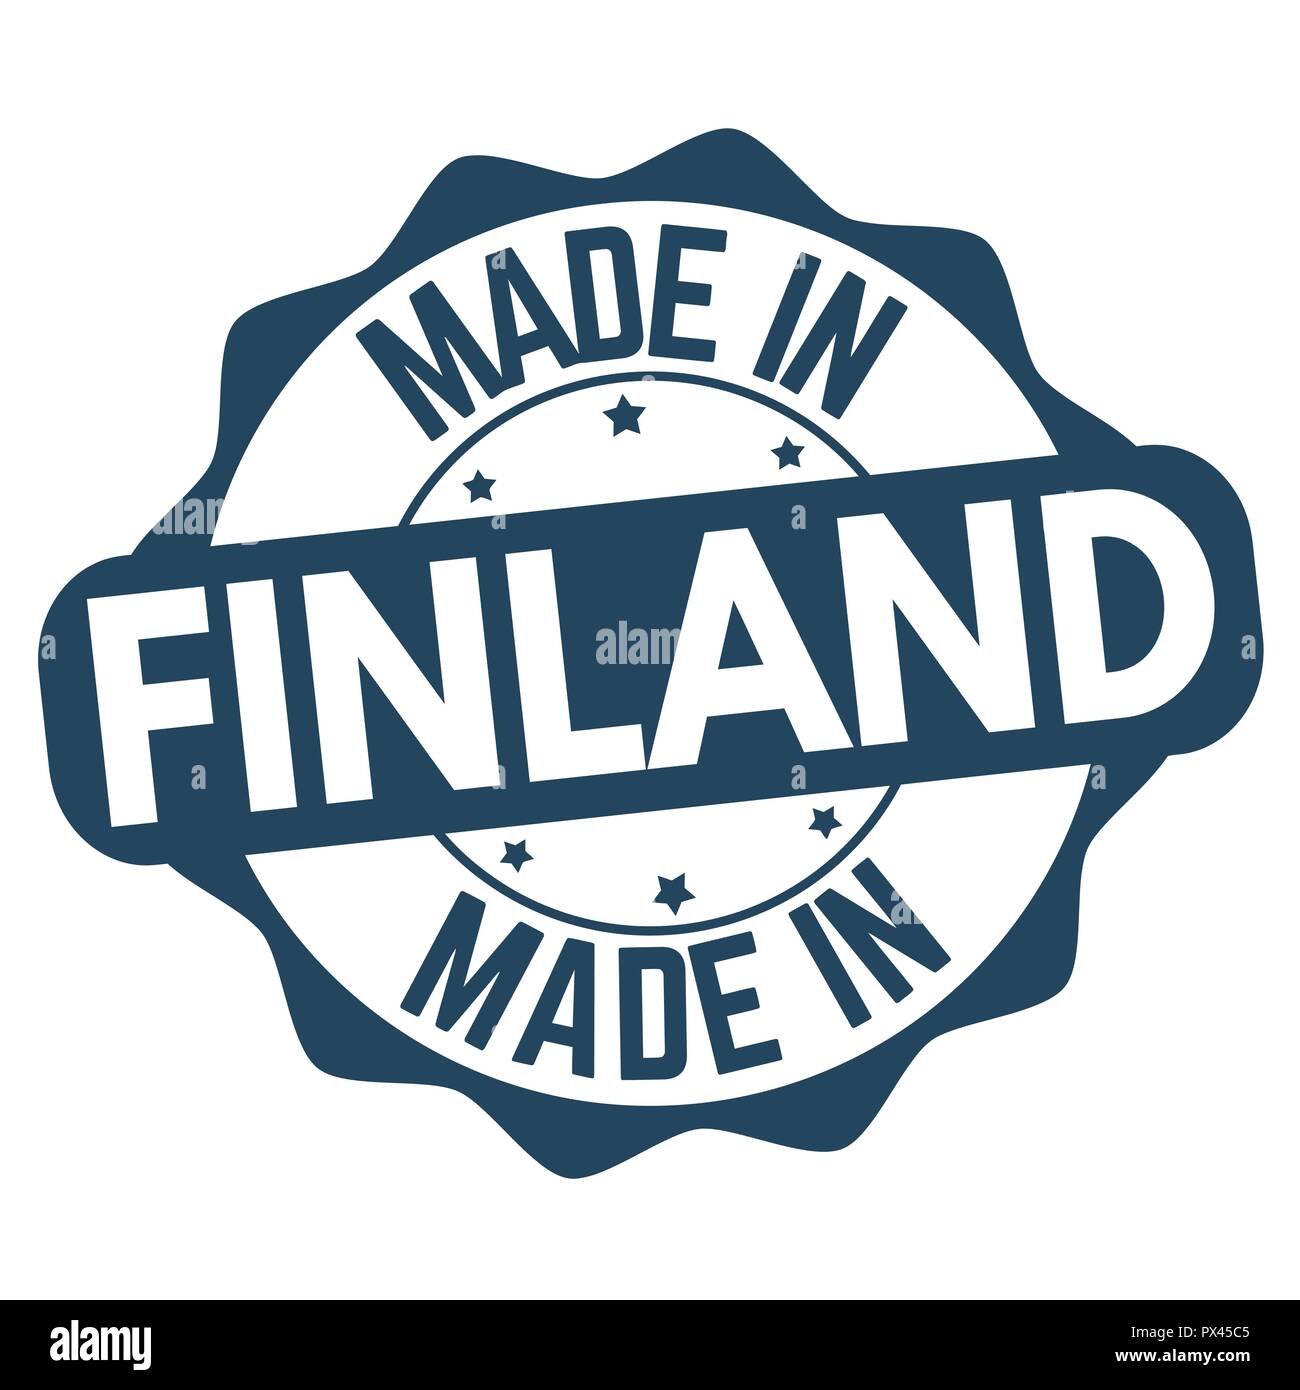 Made in Finland sign or stamp on white background, vector illustration Stock Vector